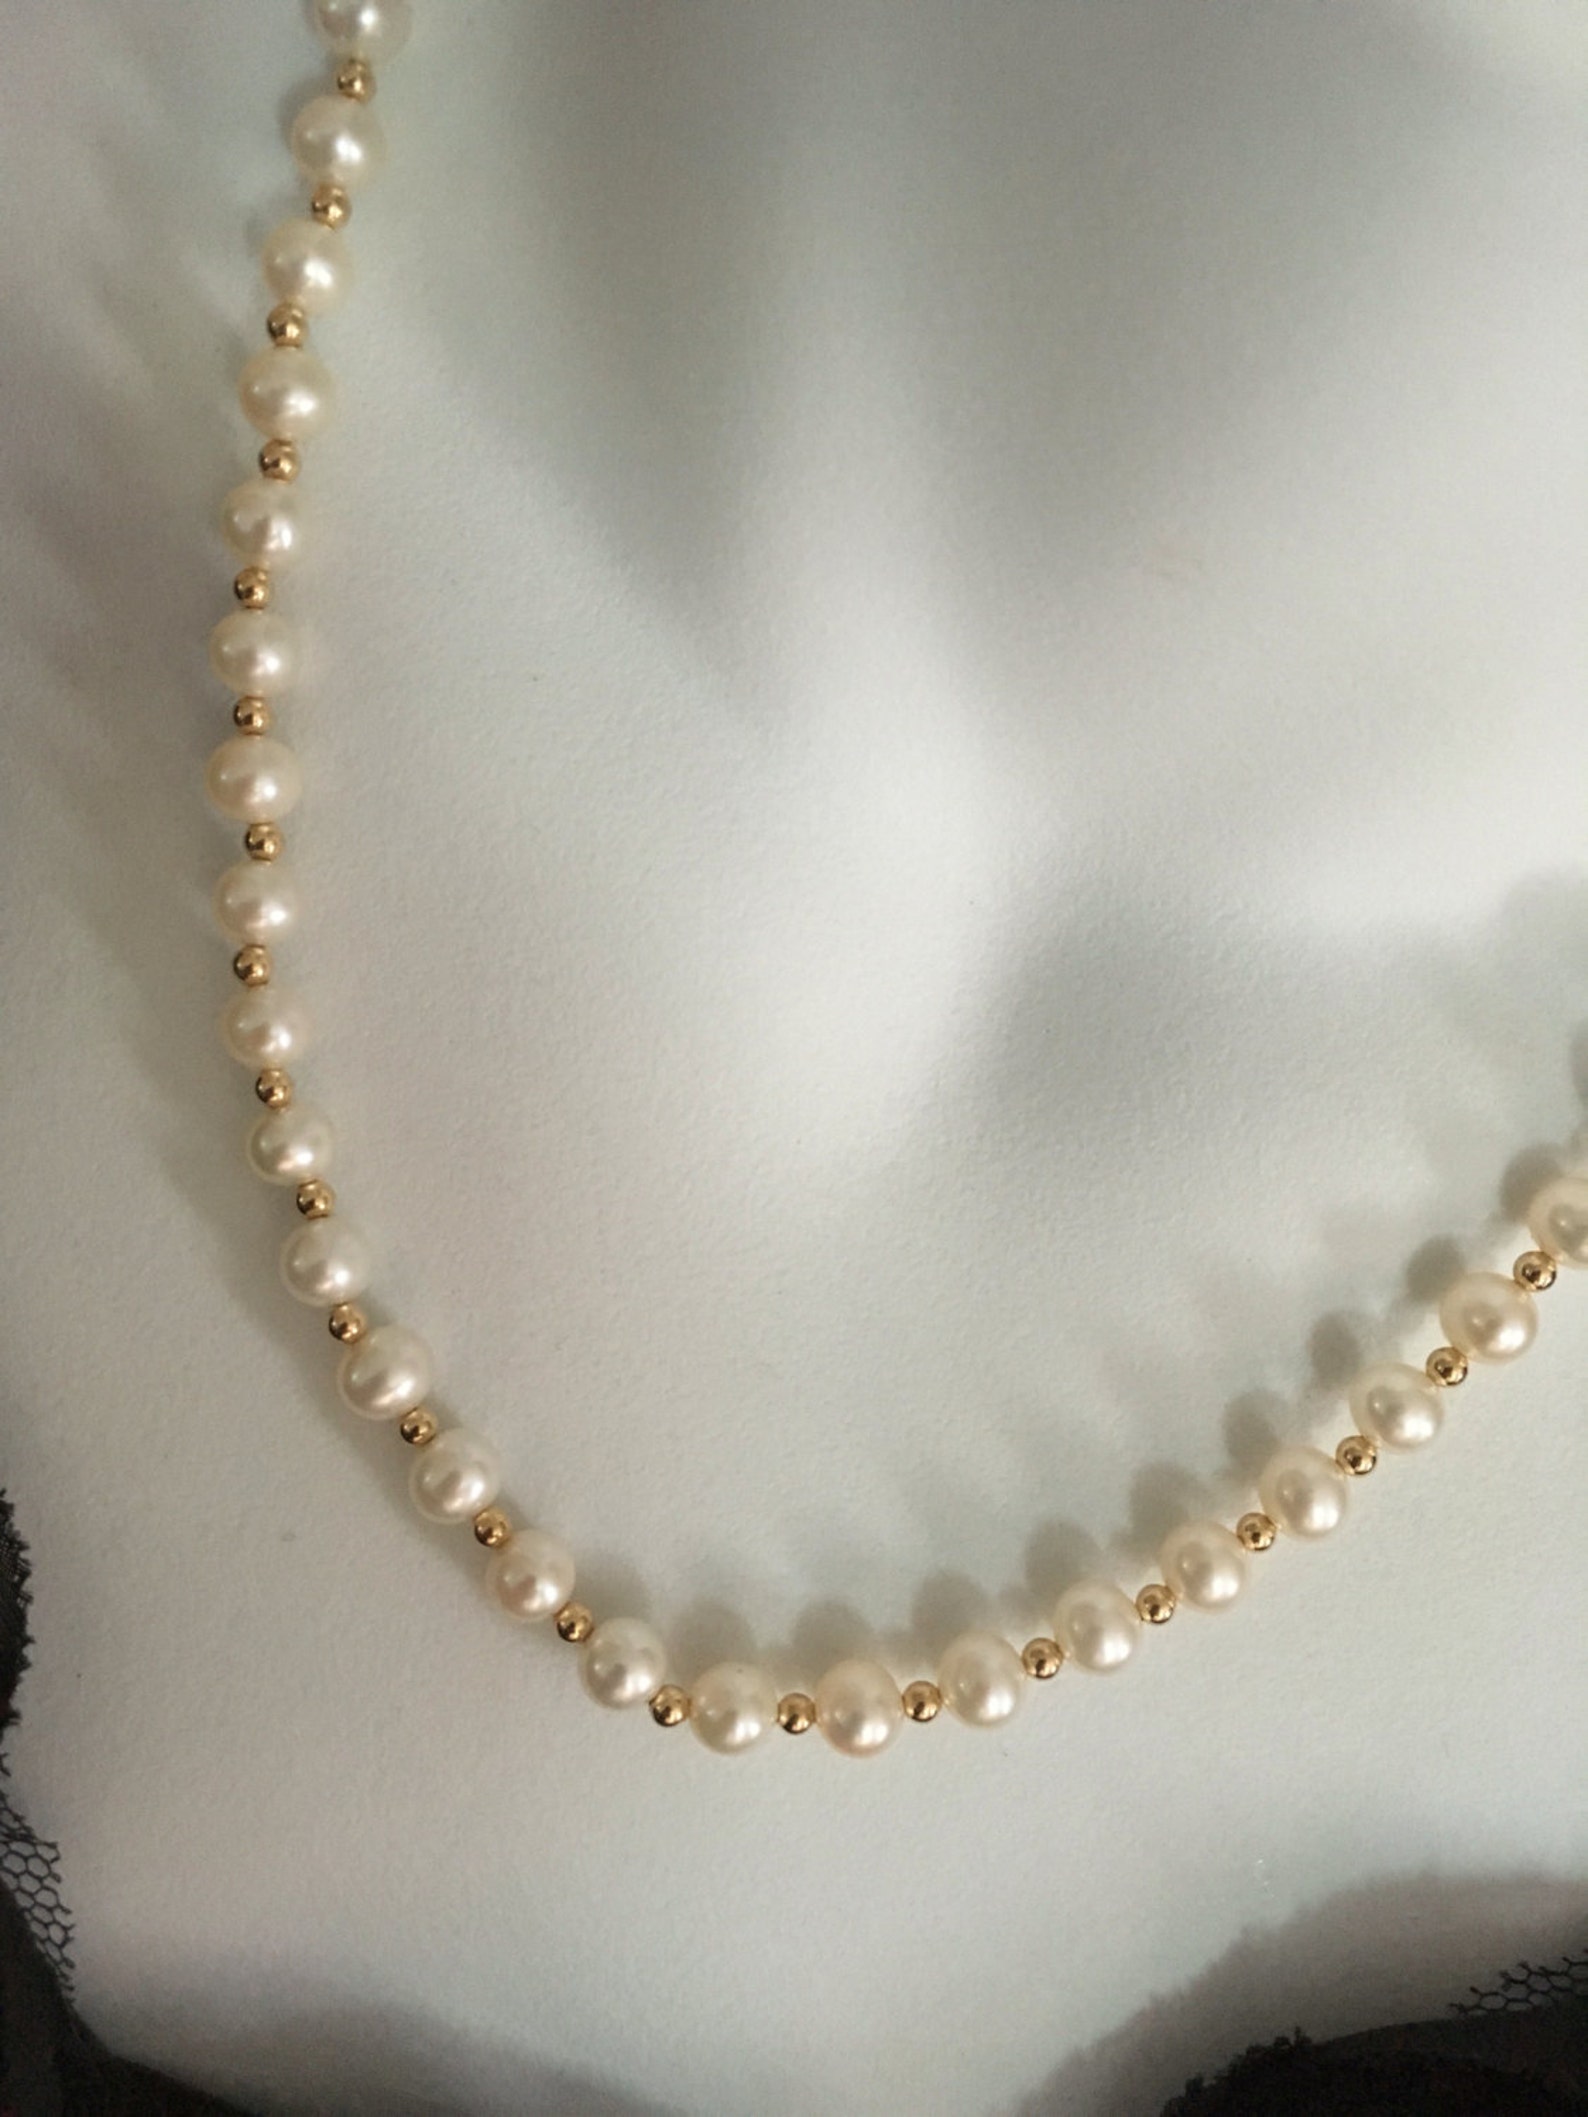 Danbury Mint Pearls and 14K Gold Spacer Necklace - Etsy